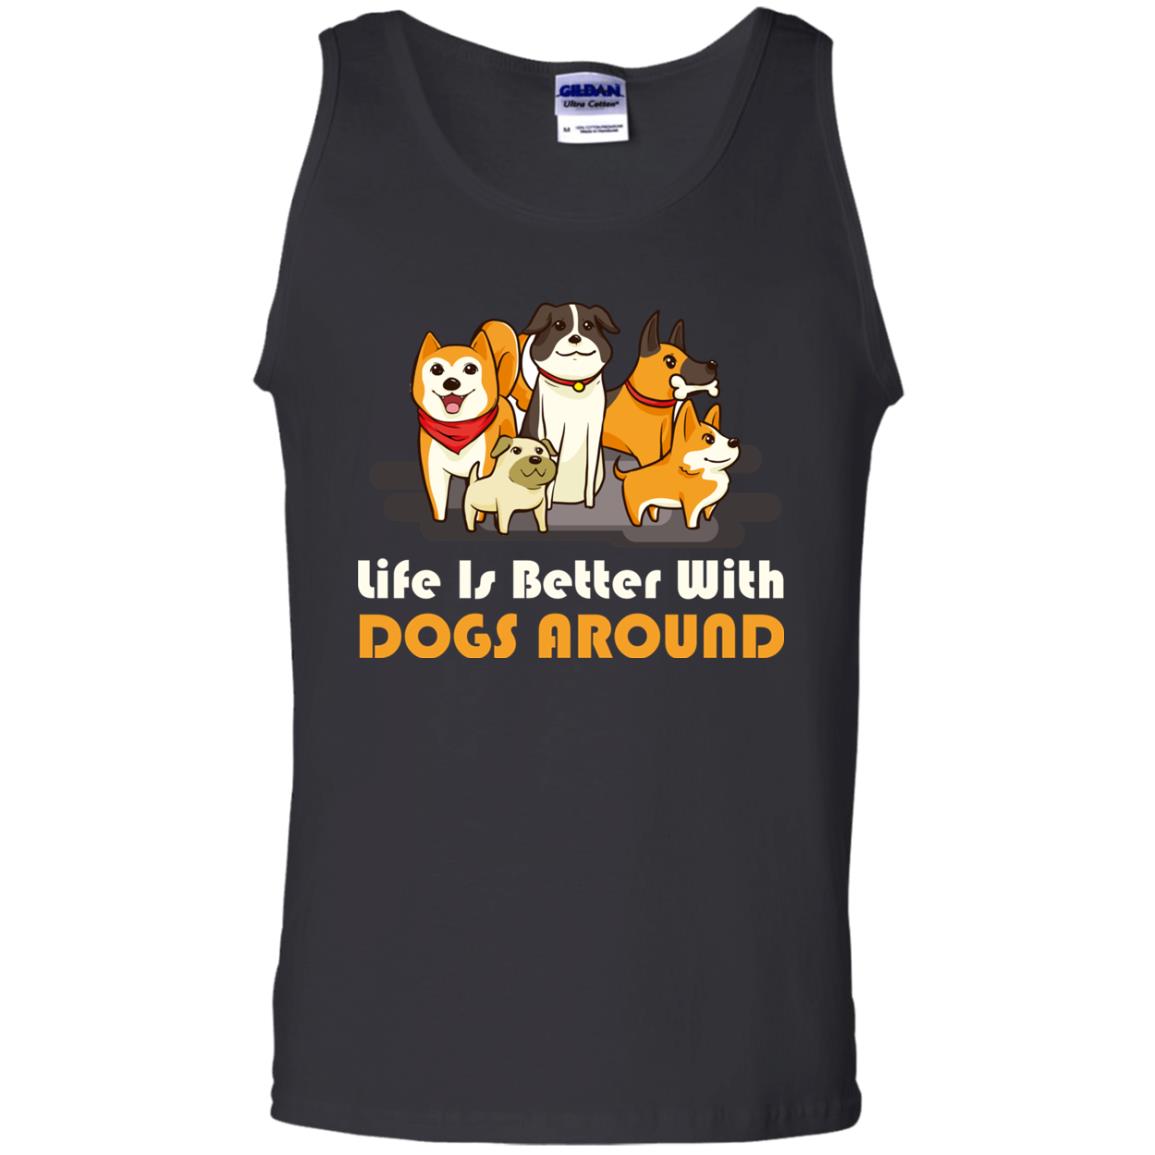 Life Is Better With Dogs Around Best Idea Shirt For Dogs Lover